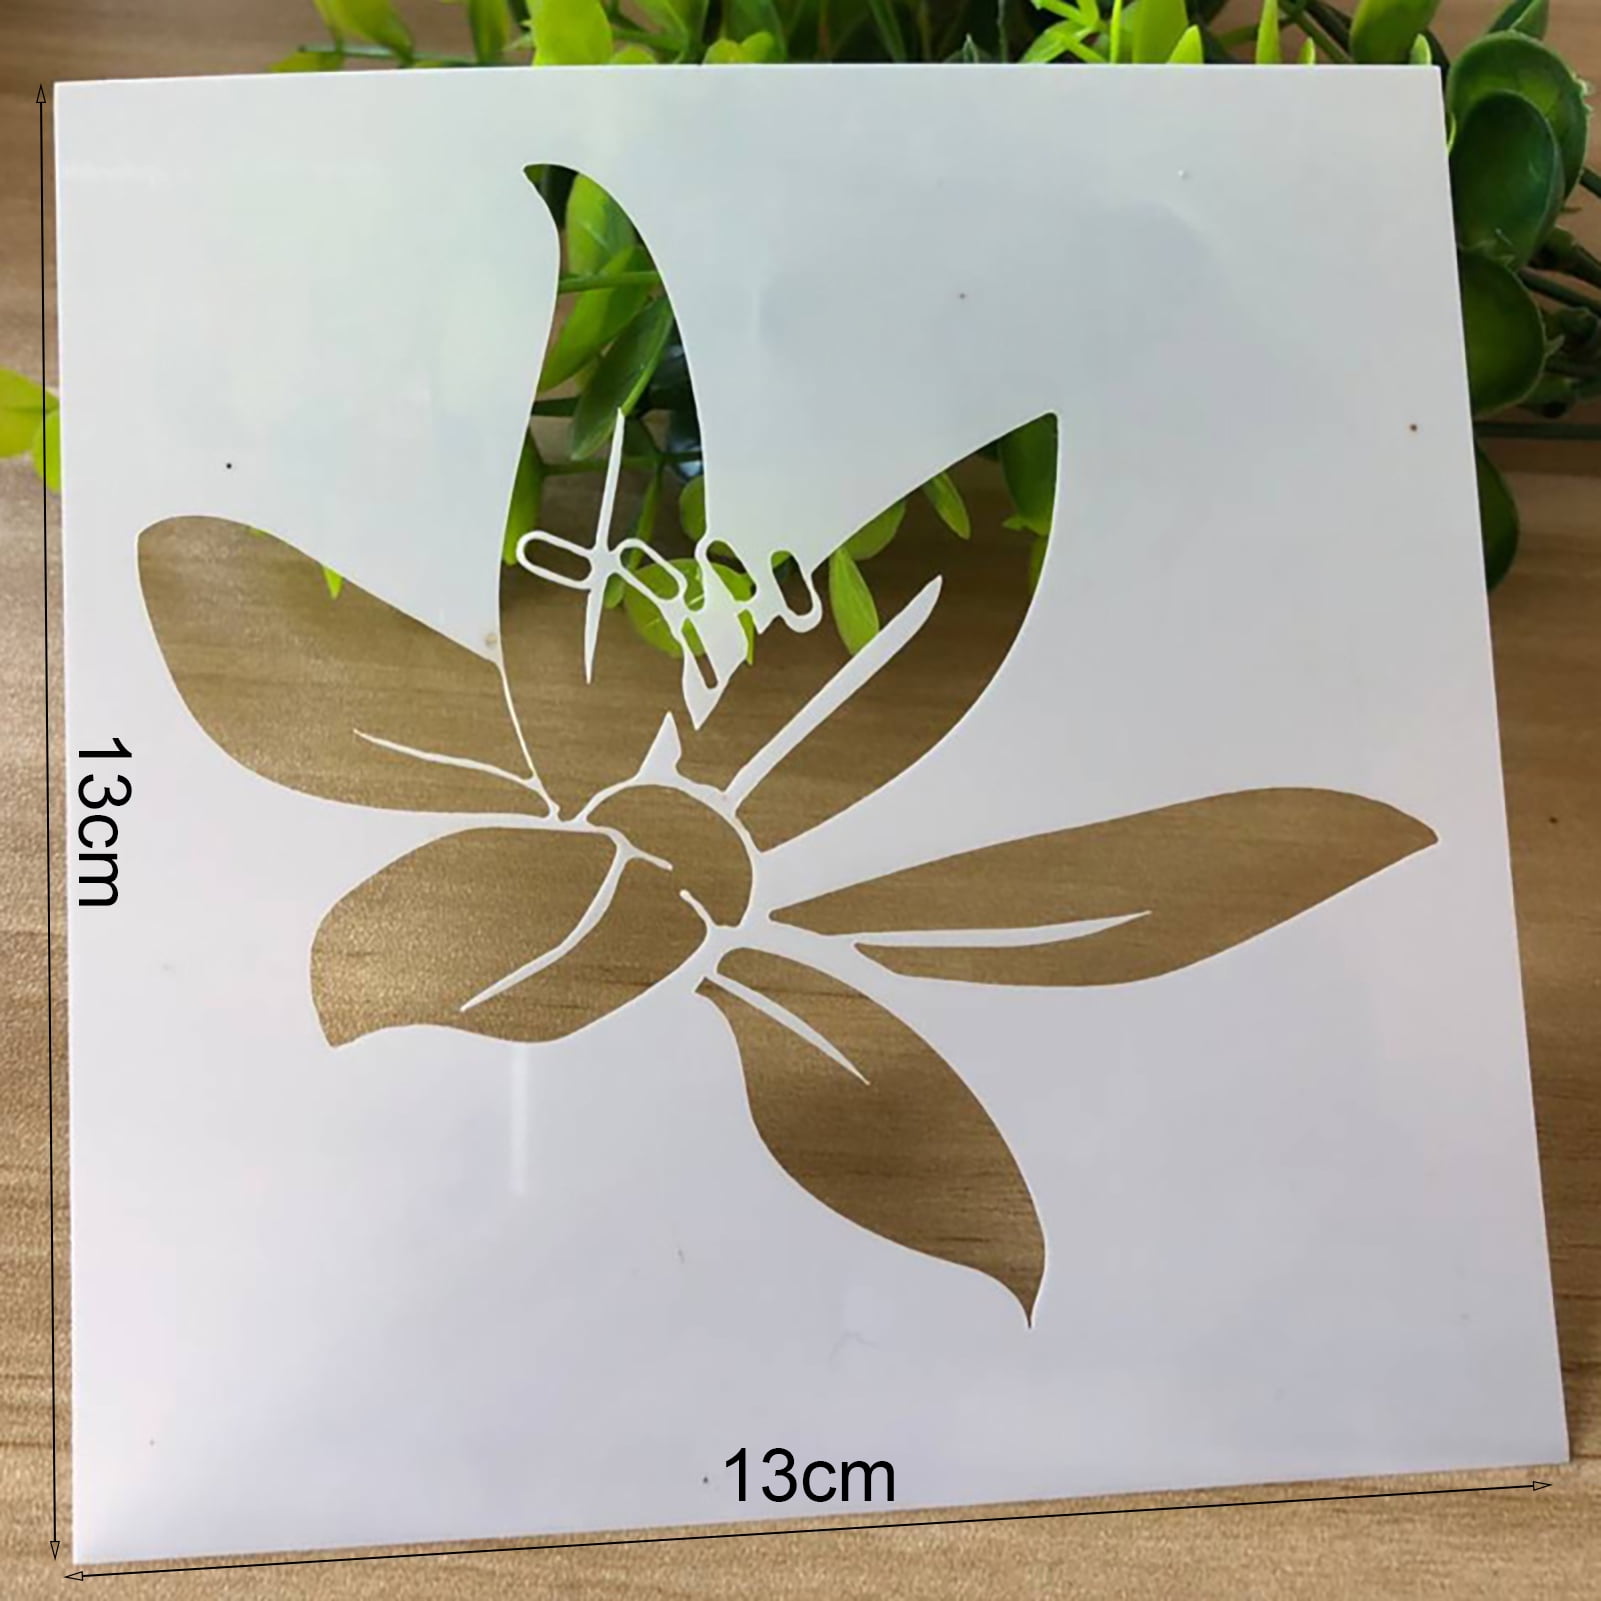 10pcs Leaf & Flower Painting Stencils, Reusable Floral Stencil With Metal  Ring, Botanical Leaves, Rose Drawing Templates For Painting On Wood Wall Can